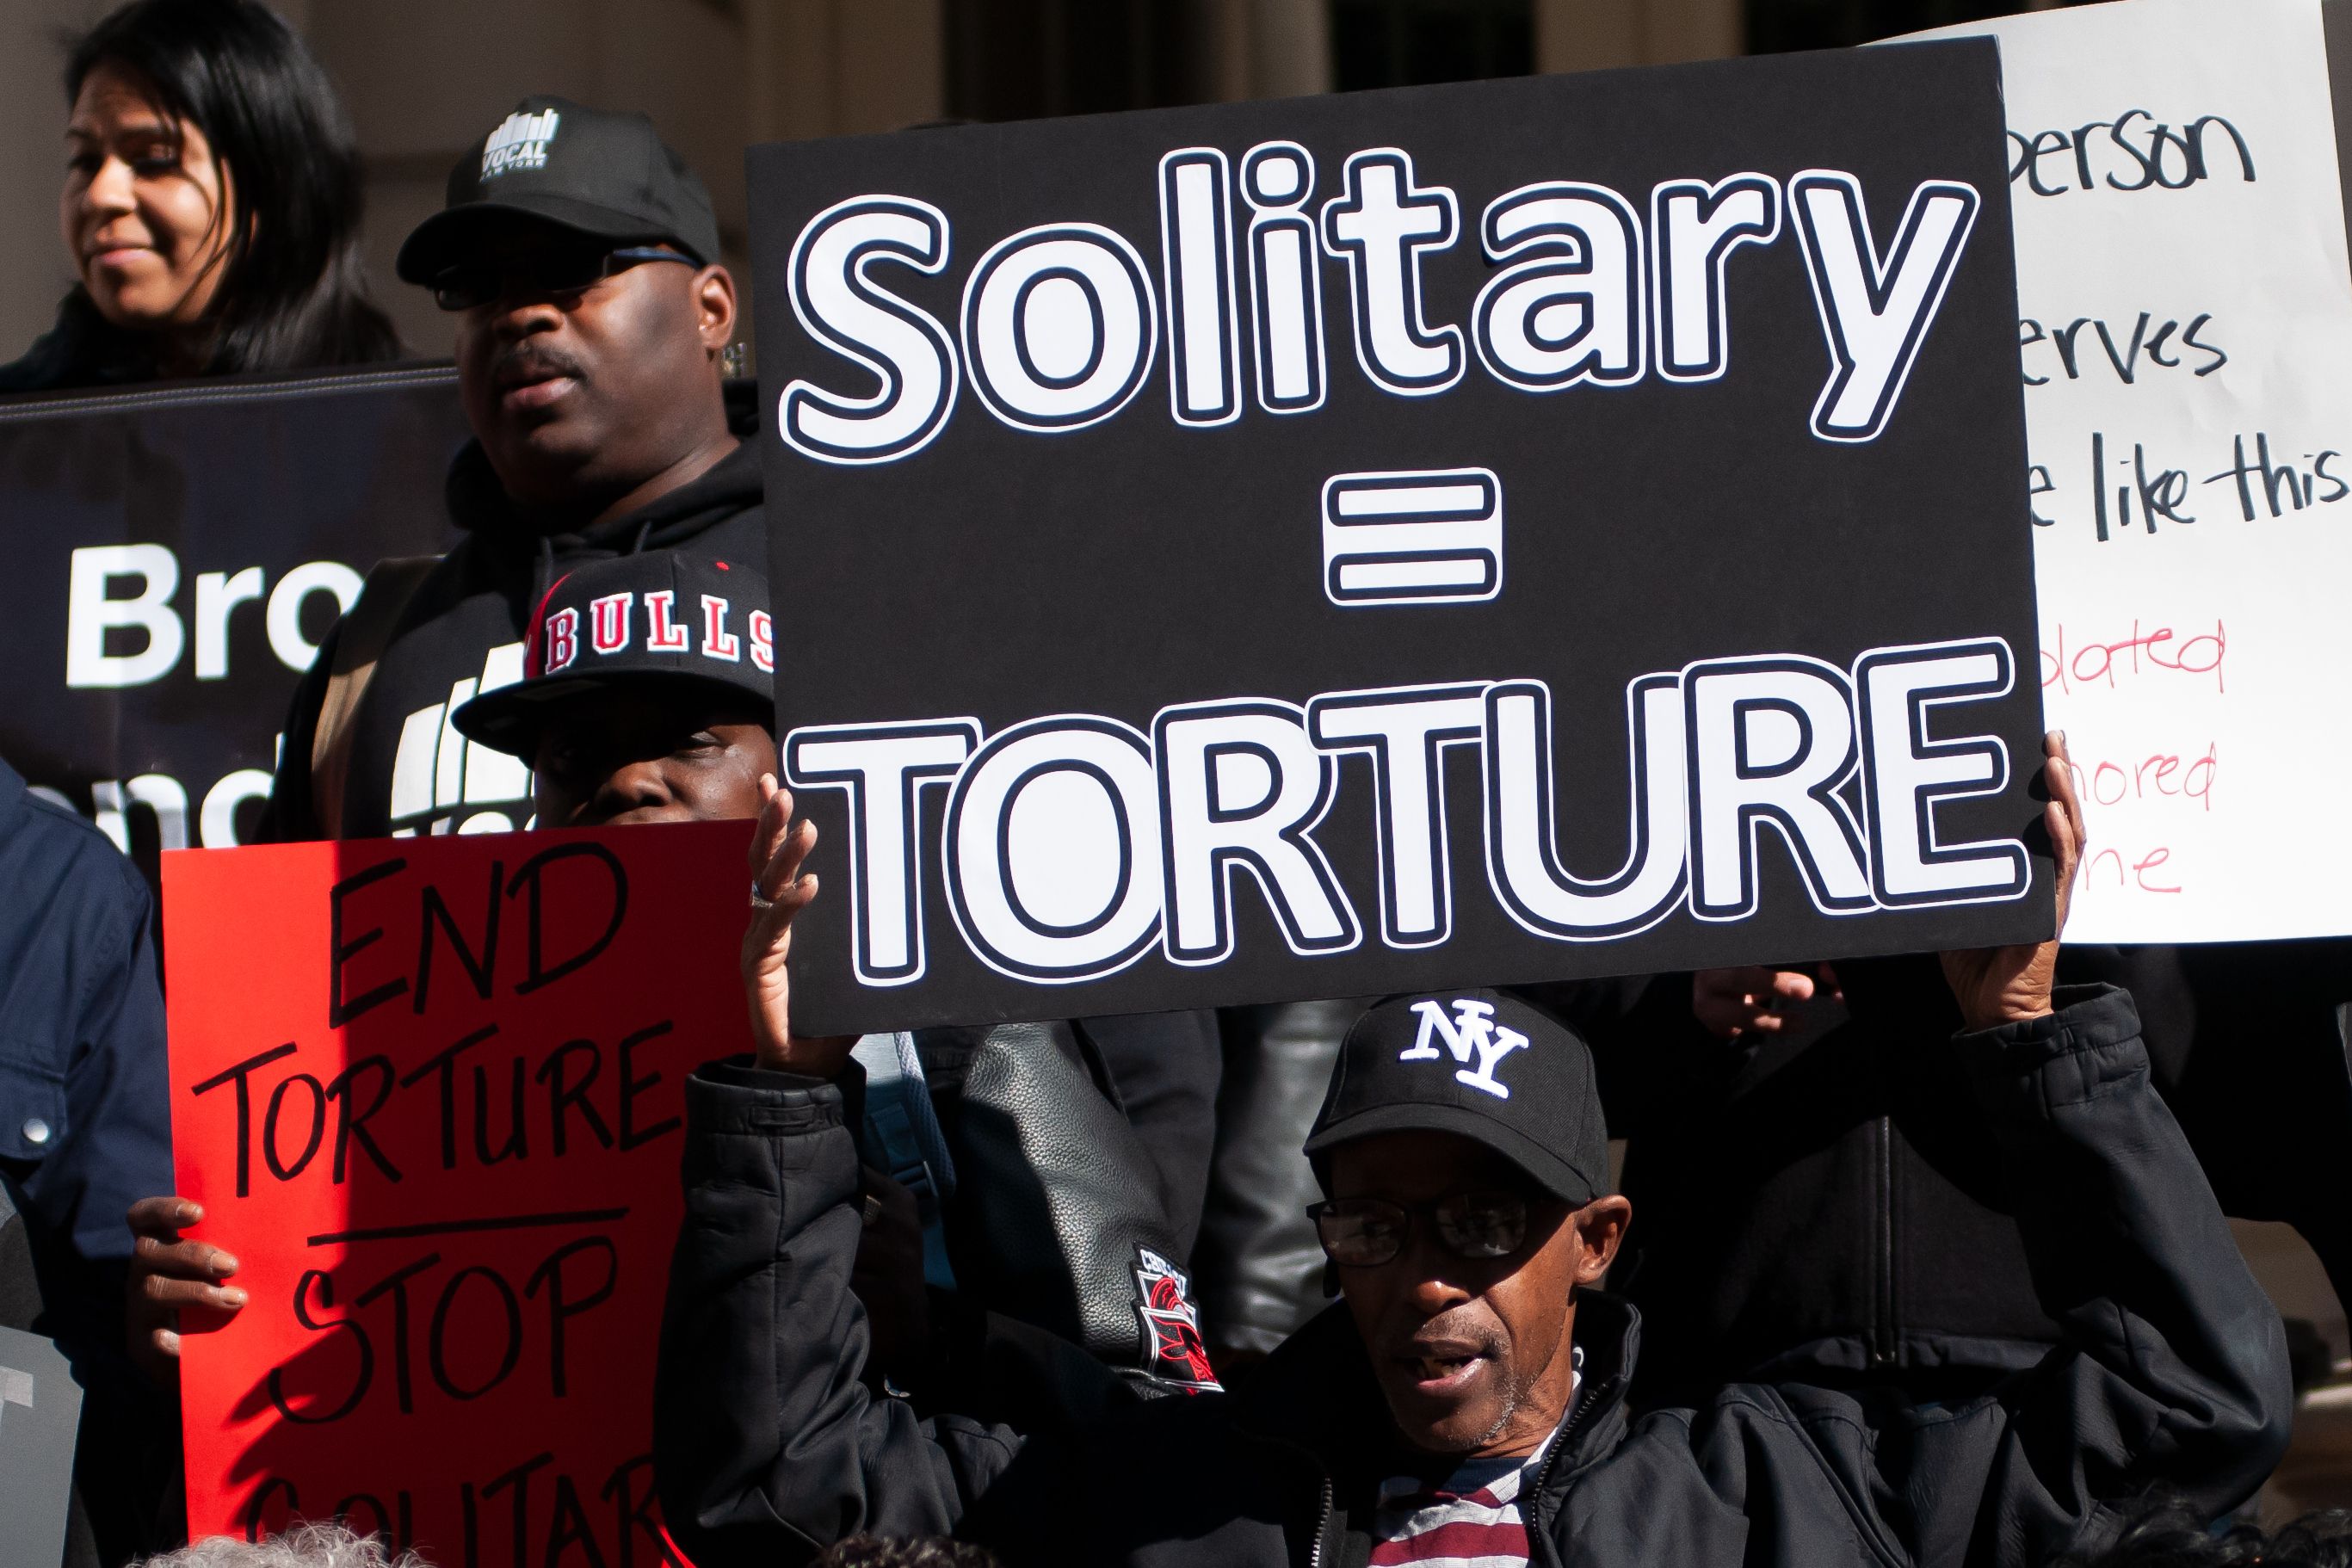 Criminal justice reform activists call for a plan to end the use of solitary confinement during a press conference on the steps of City Hall, Oct. 21, 2019.